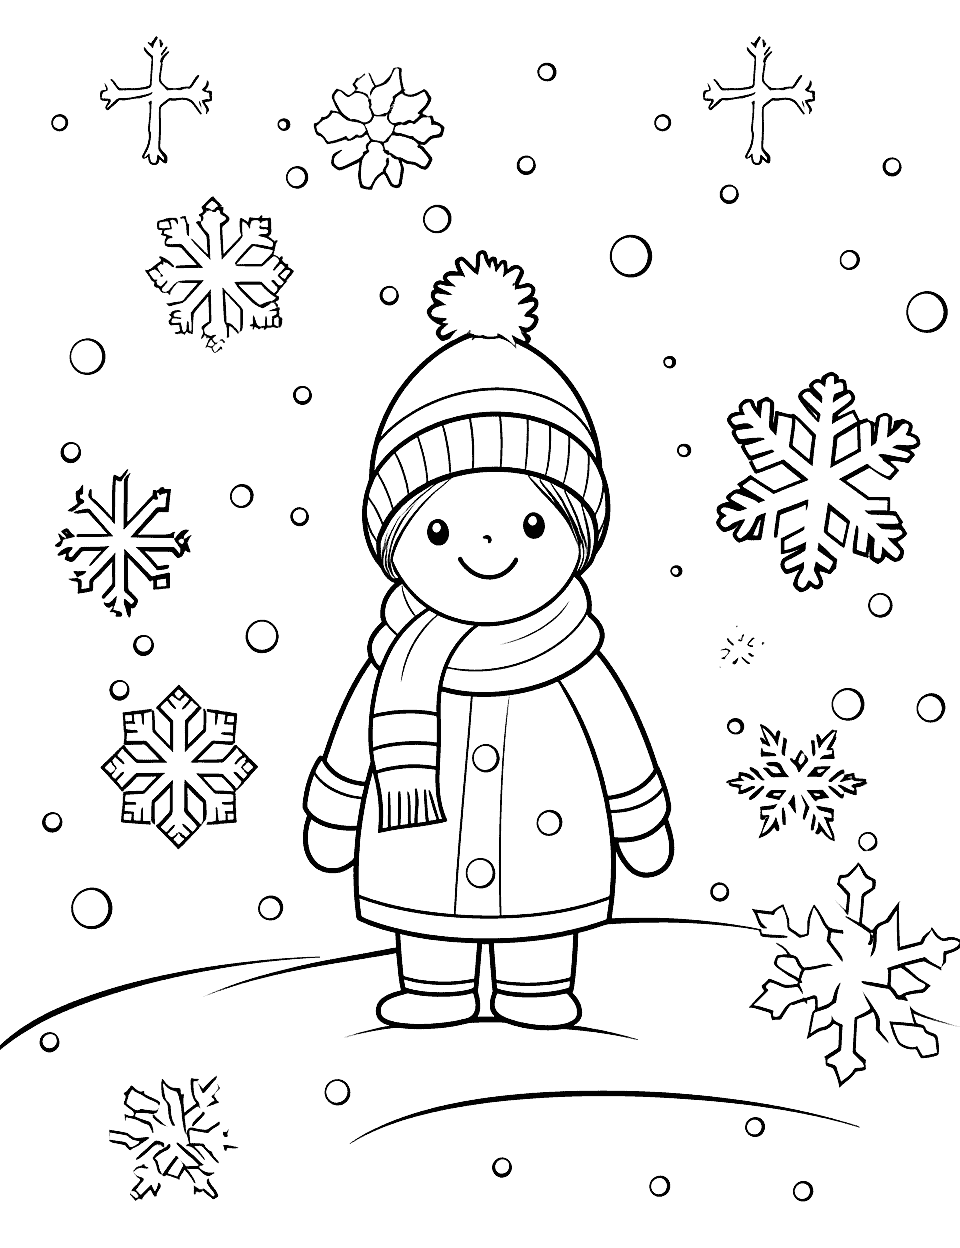 Preschool Snowfall Winter Coloring Page - Big, fluffy snowflakes falling, perfect for preschoolers.